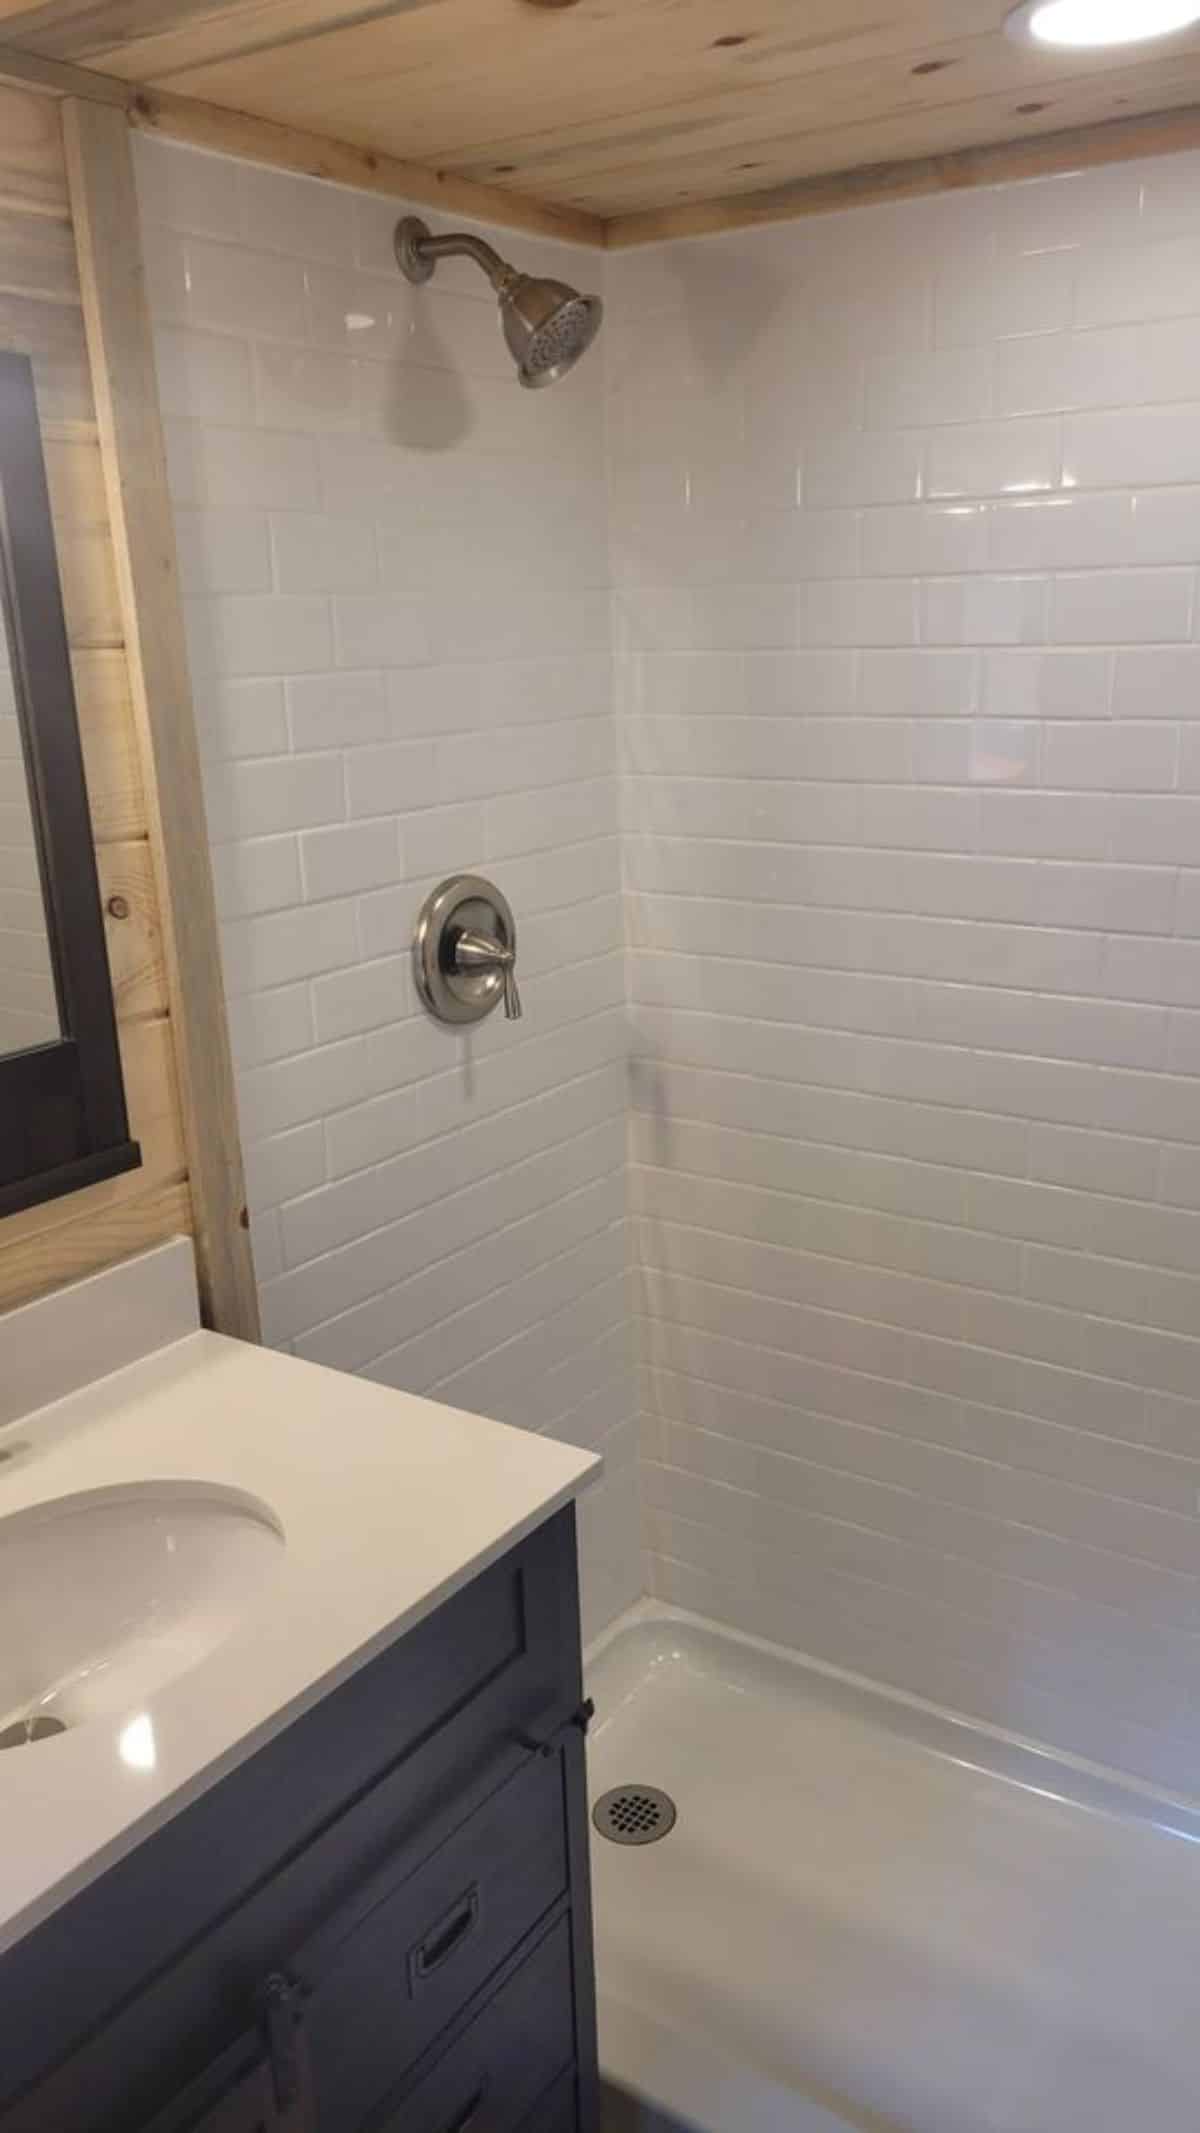 Separate shower area, sink with vanity in bathroom of 28’ tiny house on wheels